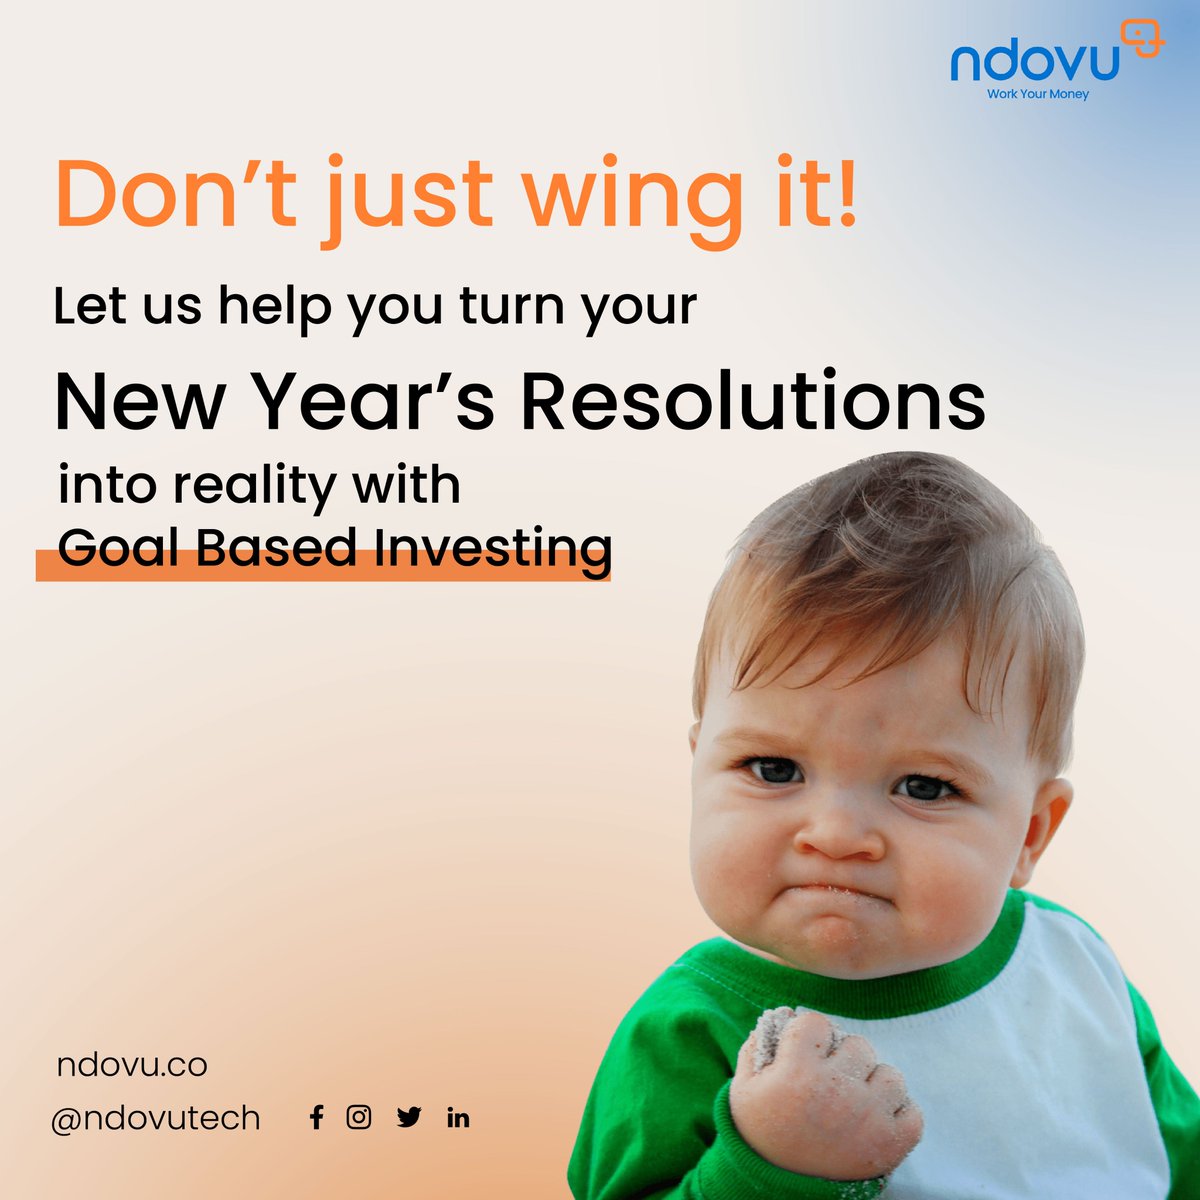 Unsure where to start when investing? 

Saving money in a bank is not the most efficient way to manage money.
Grow your money with Goal Based Investing. 
Sign up at ndovu.co

#LionelMessi #Arsenal #MondayMotivation #Kenya #Trending #GoalInvesting #ManagingMoney